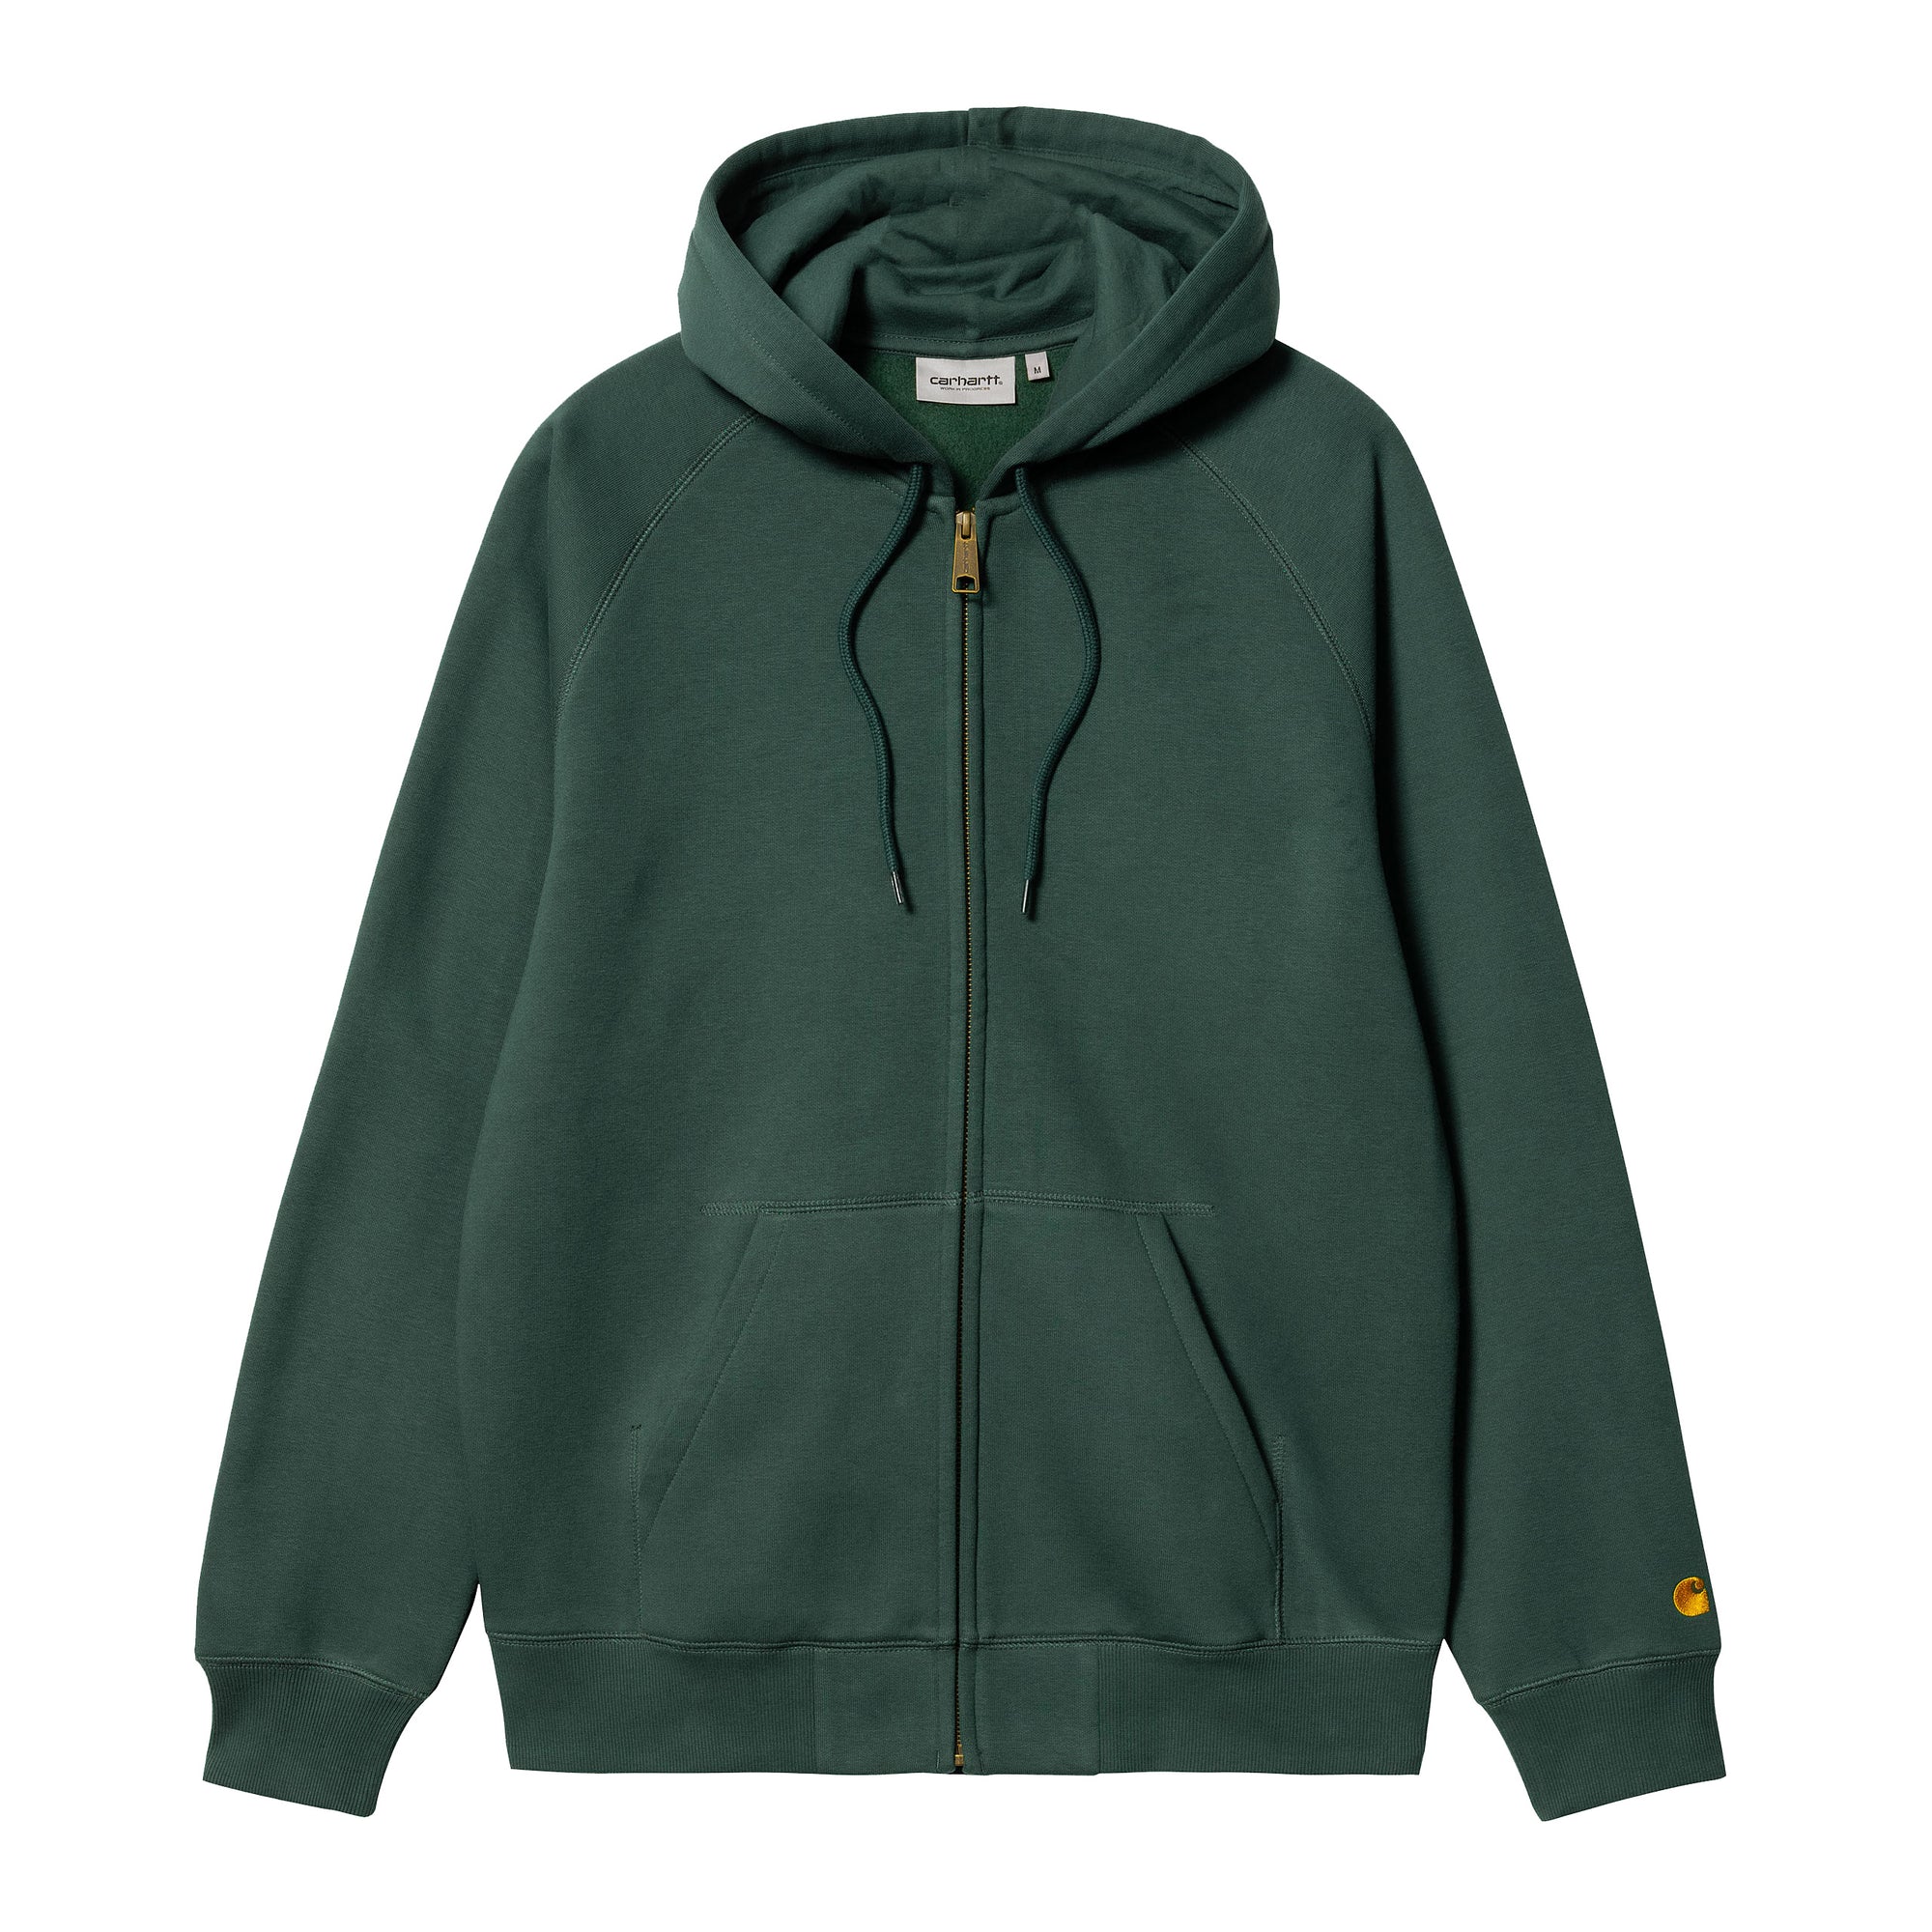 Carhartt WIP Chase Hooded Zip Sweatshirt in discovery green/gold is a timeless classic made of a cotton-polyester blend to keep you warm and comfortable. Pay with Klarna or Paypal.